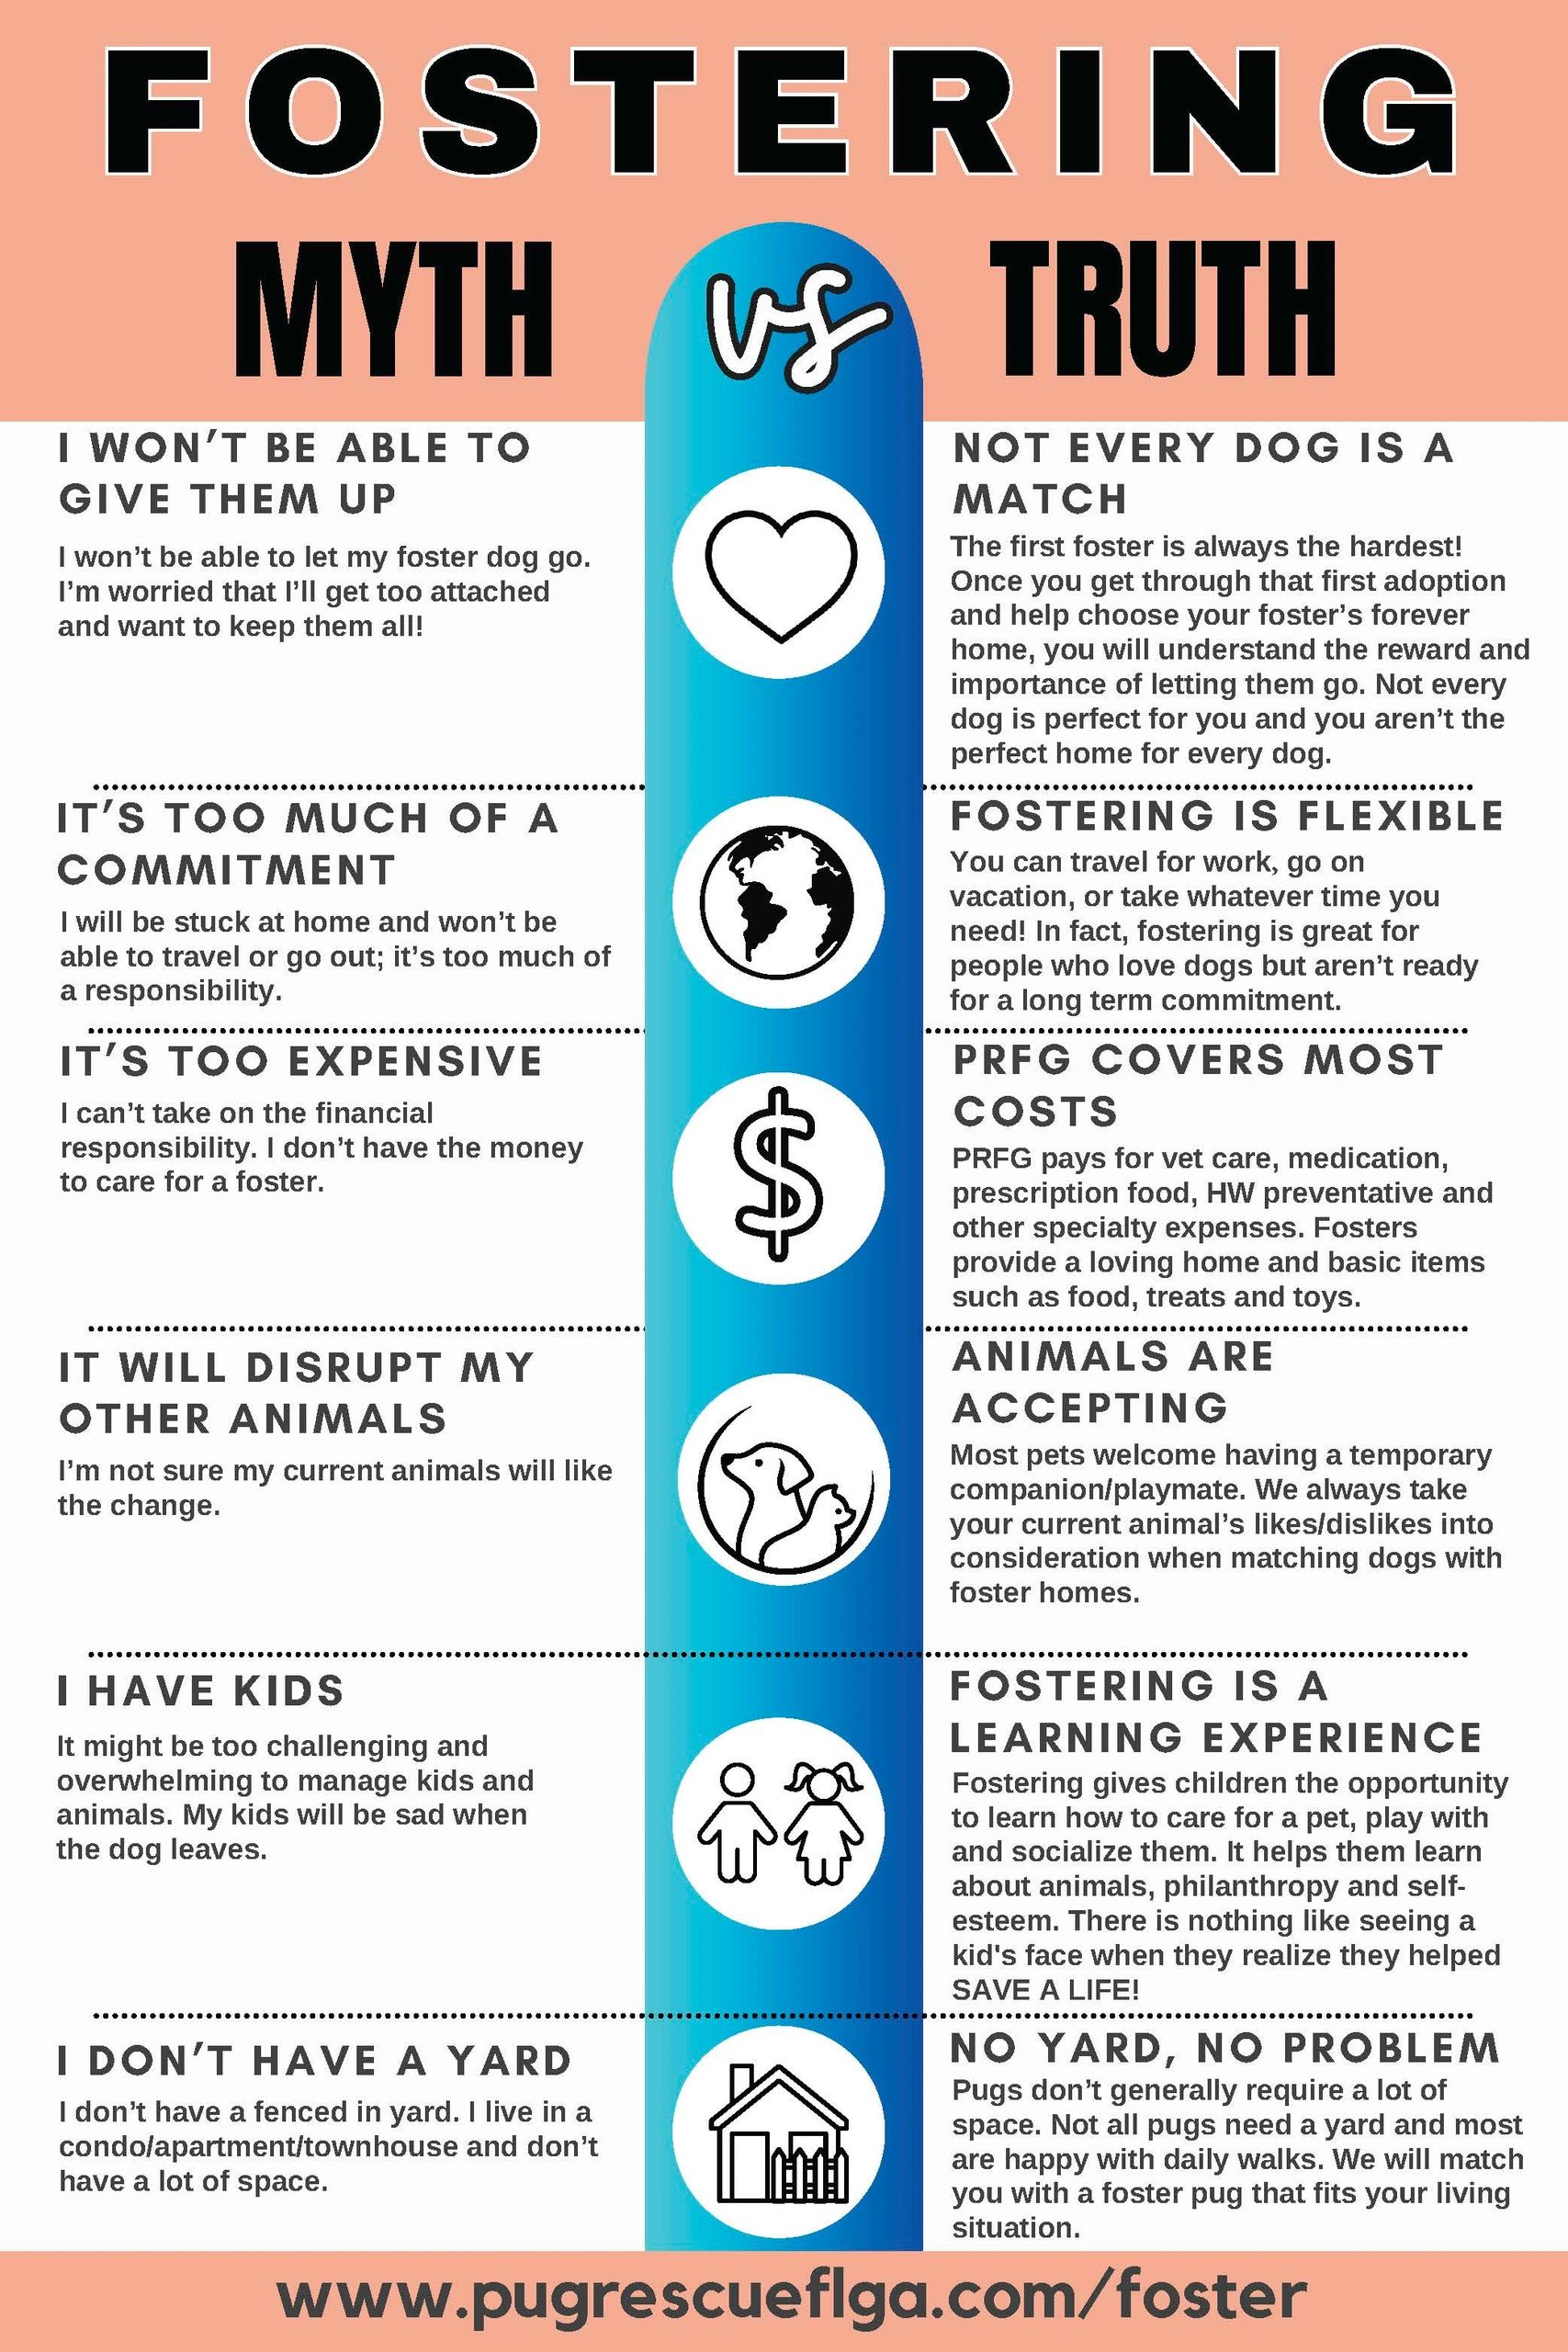 infographic about fostering myth vs truth 